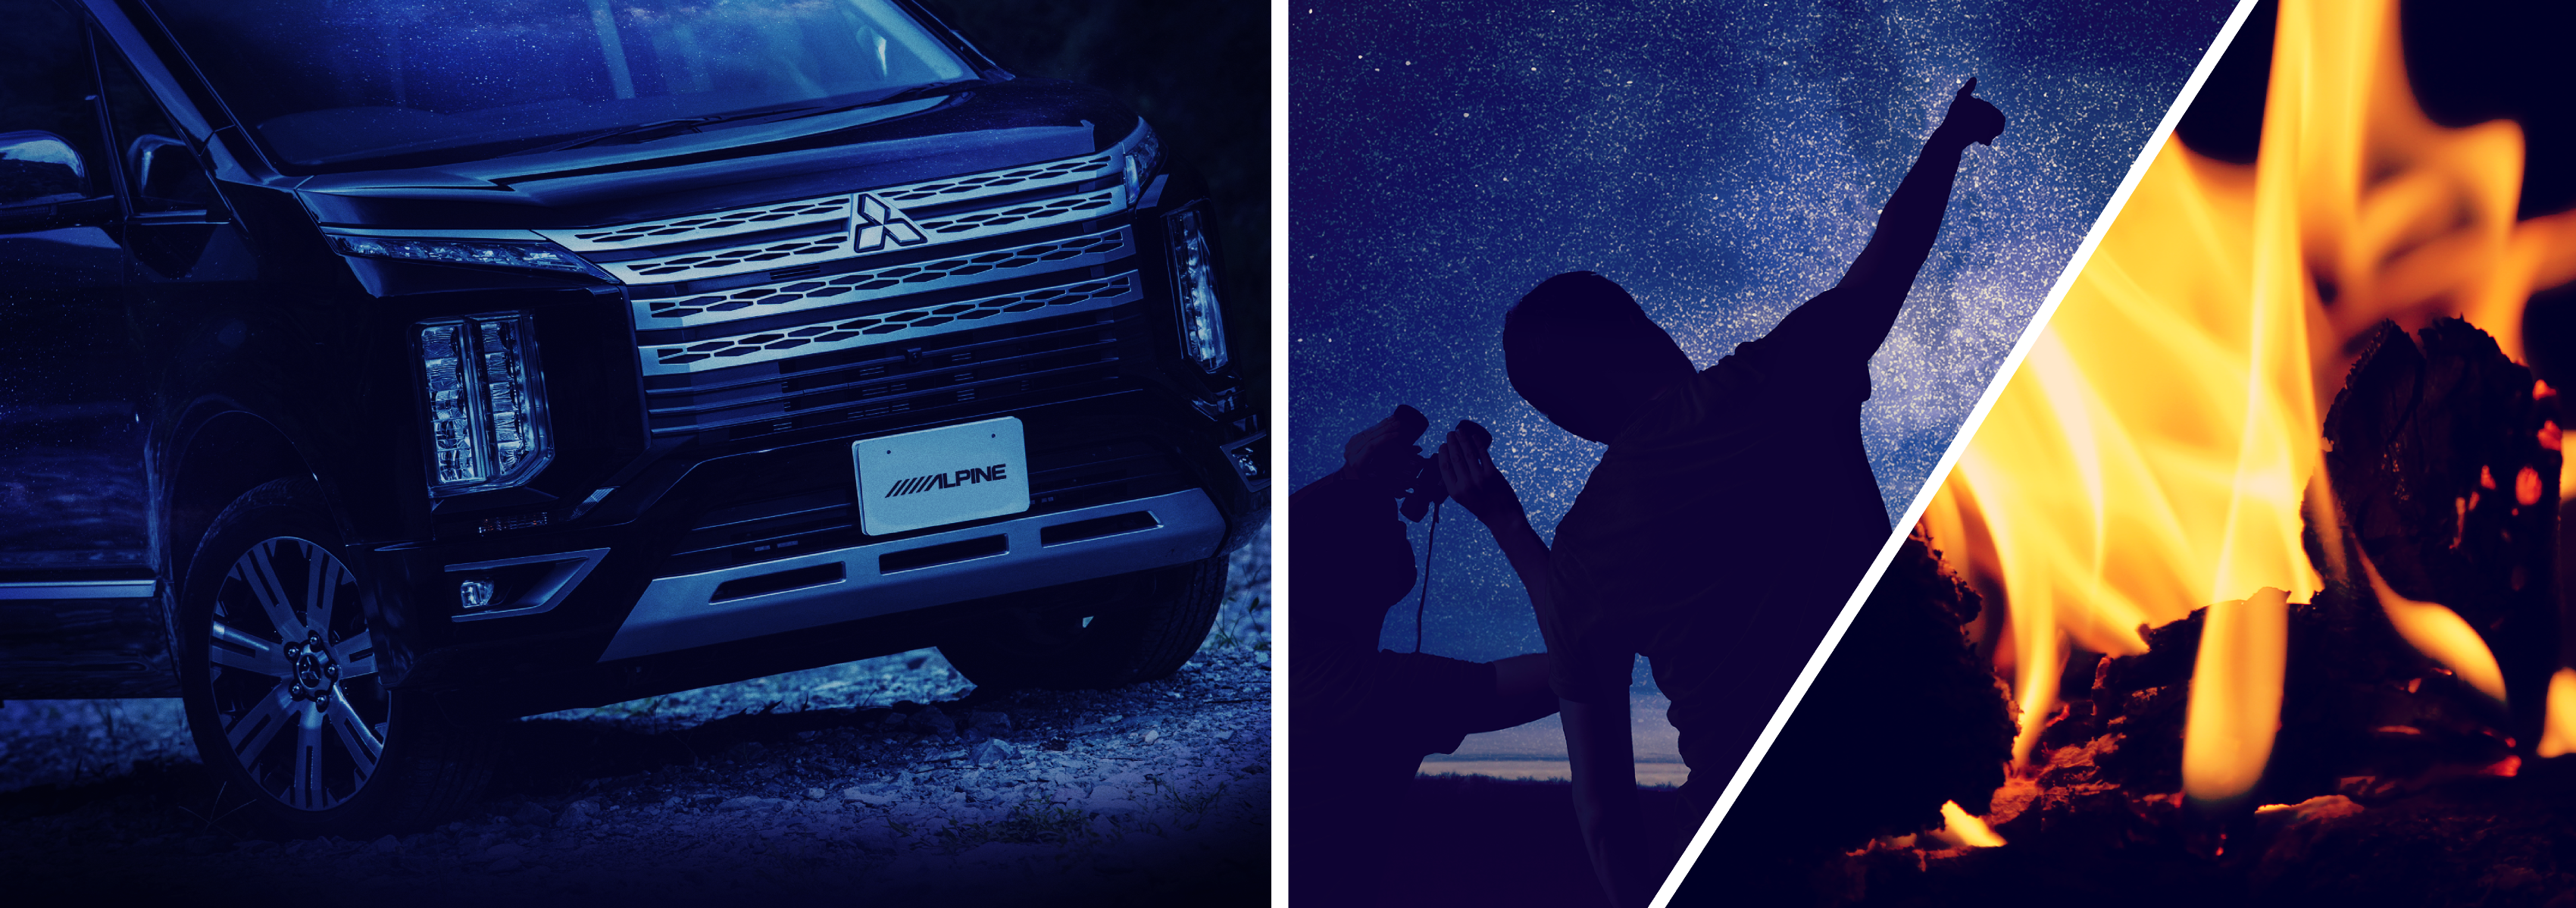 Enjoy starwatching with DELICA D:5